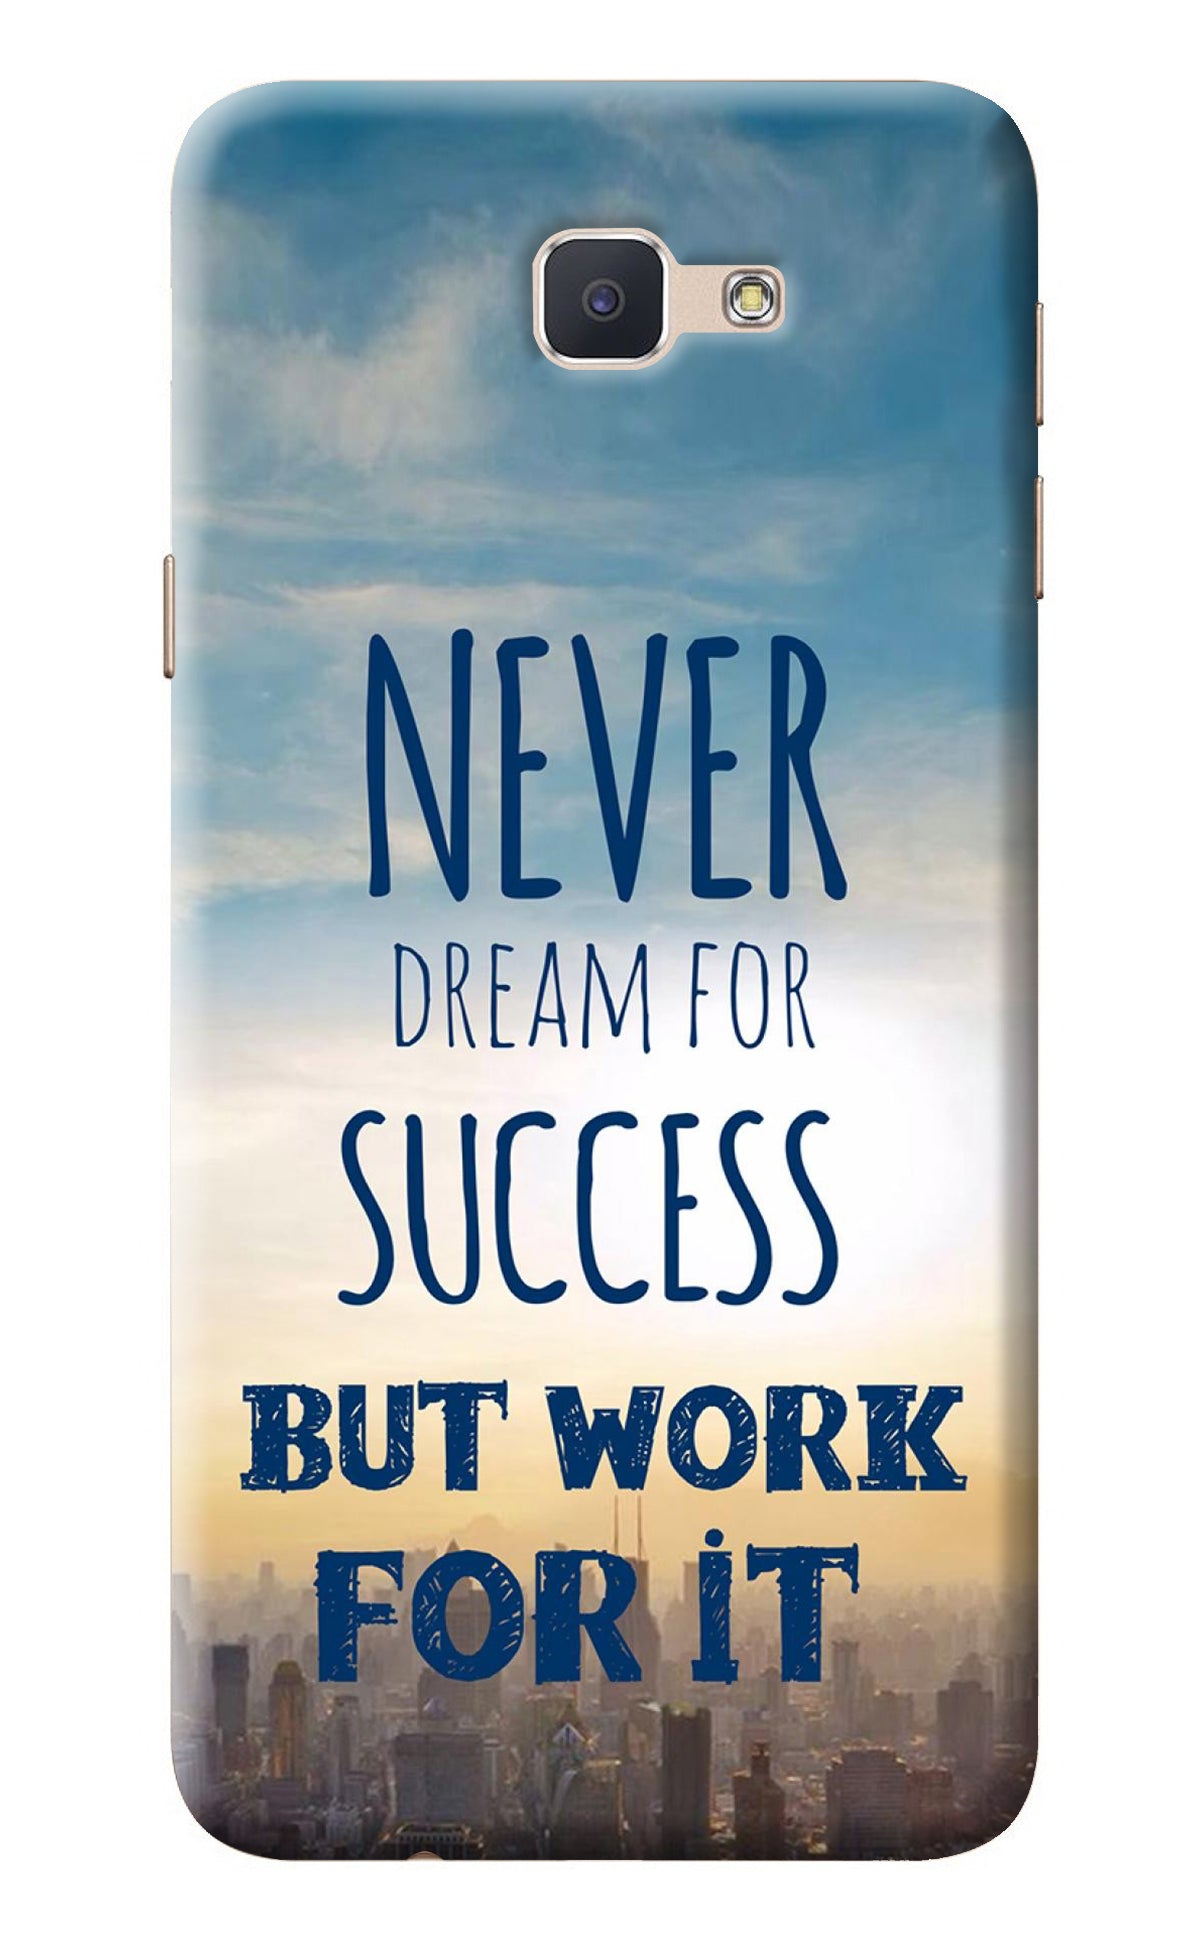 Never Dream For Success But Work For It Samsung J7 Prime Back Cover